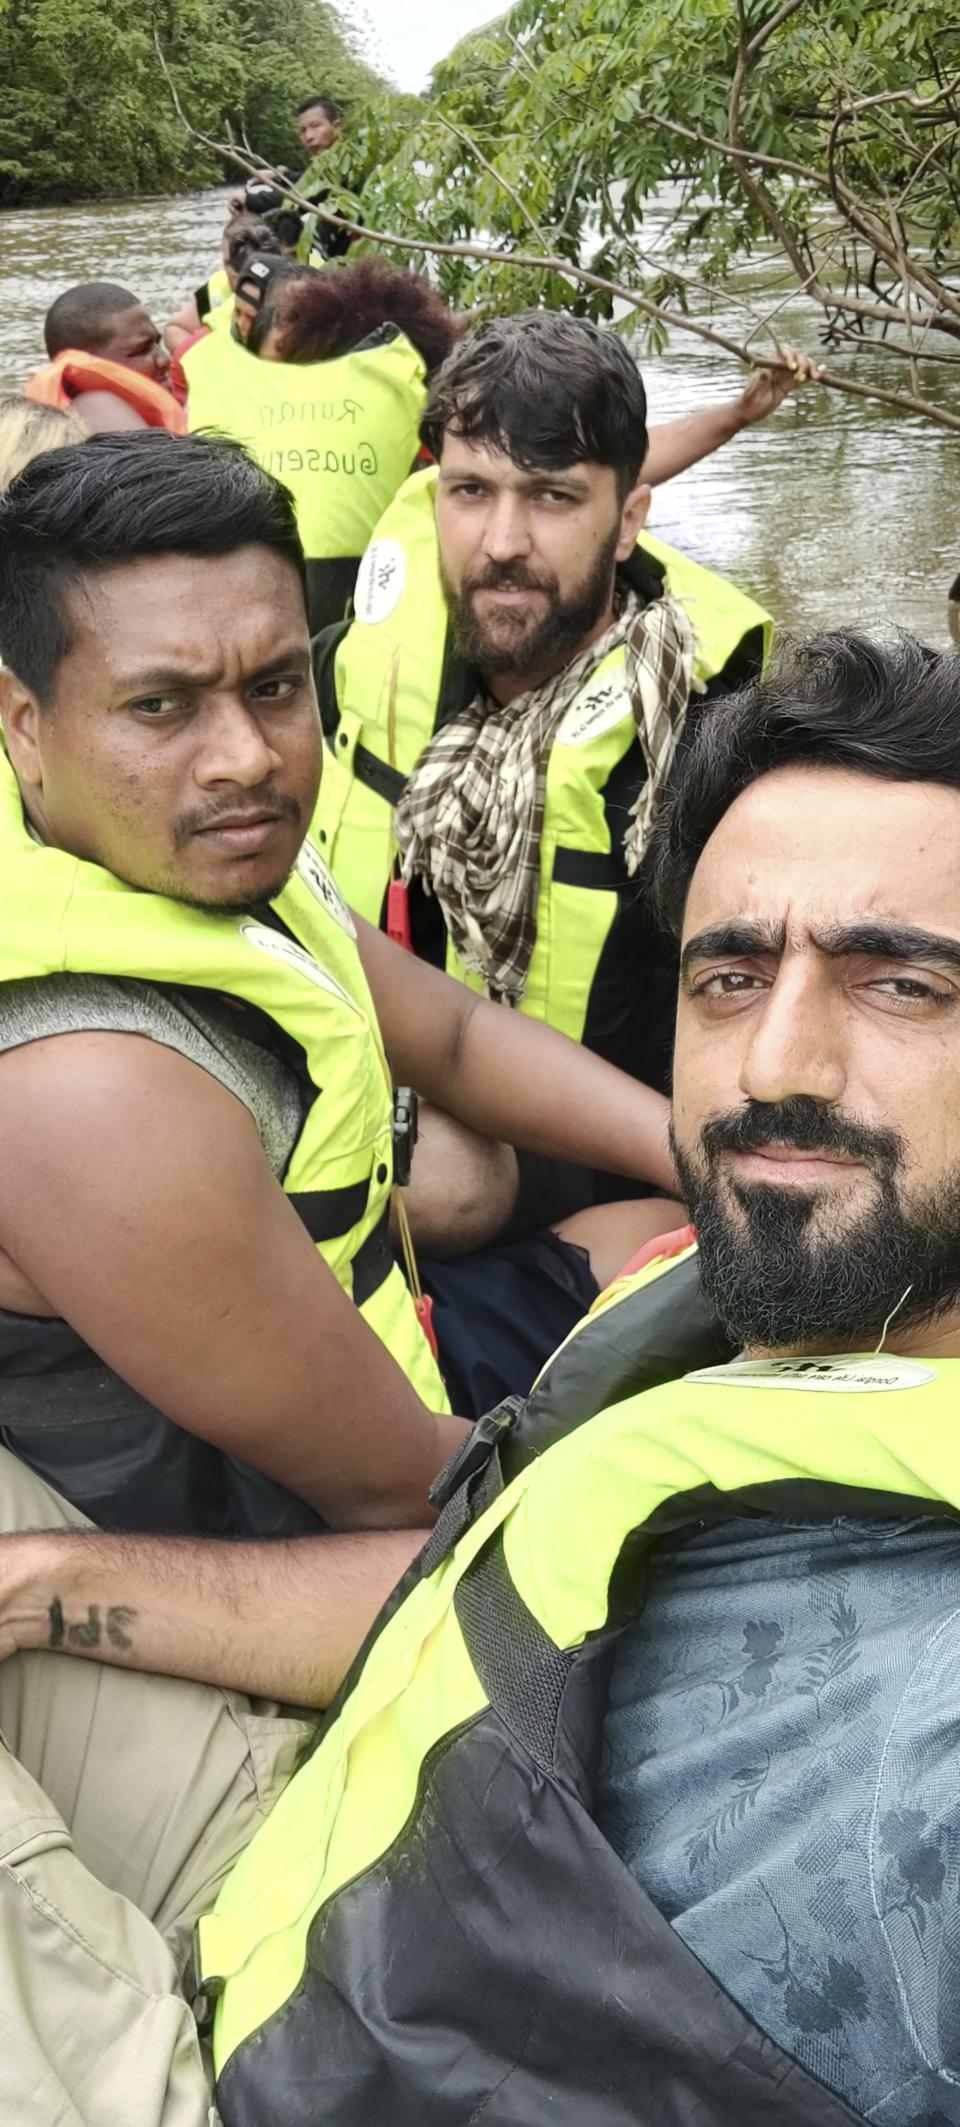 In this photograph provided by Sami-ullah Safi, Abdul Wasi Safi, bottom right, takes selfie near the Darien Gap, a stretch of land that separates Colombia and Panama, in the summer of 2022, during his journey to the U.S in 2022. Safi's brother, who's called Wasi by his family, was an intelligence officer with the Afghan National Security Forces, providing U.S. armed forces with information for operations against terrorists, said Sami-ullah Safi. Wasi was arrested after crossing the U.S.-Mexico border near Eagle Pass, Texas in September 2022, and charged with a federal misdemeanor related to wrongly entering the country and placed in a detention center in Central Texas. (AP Photo/Abdul Wasi Safi)